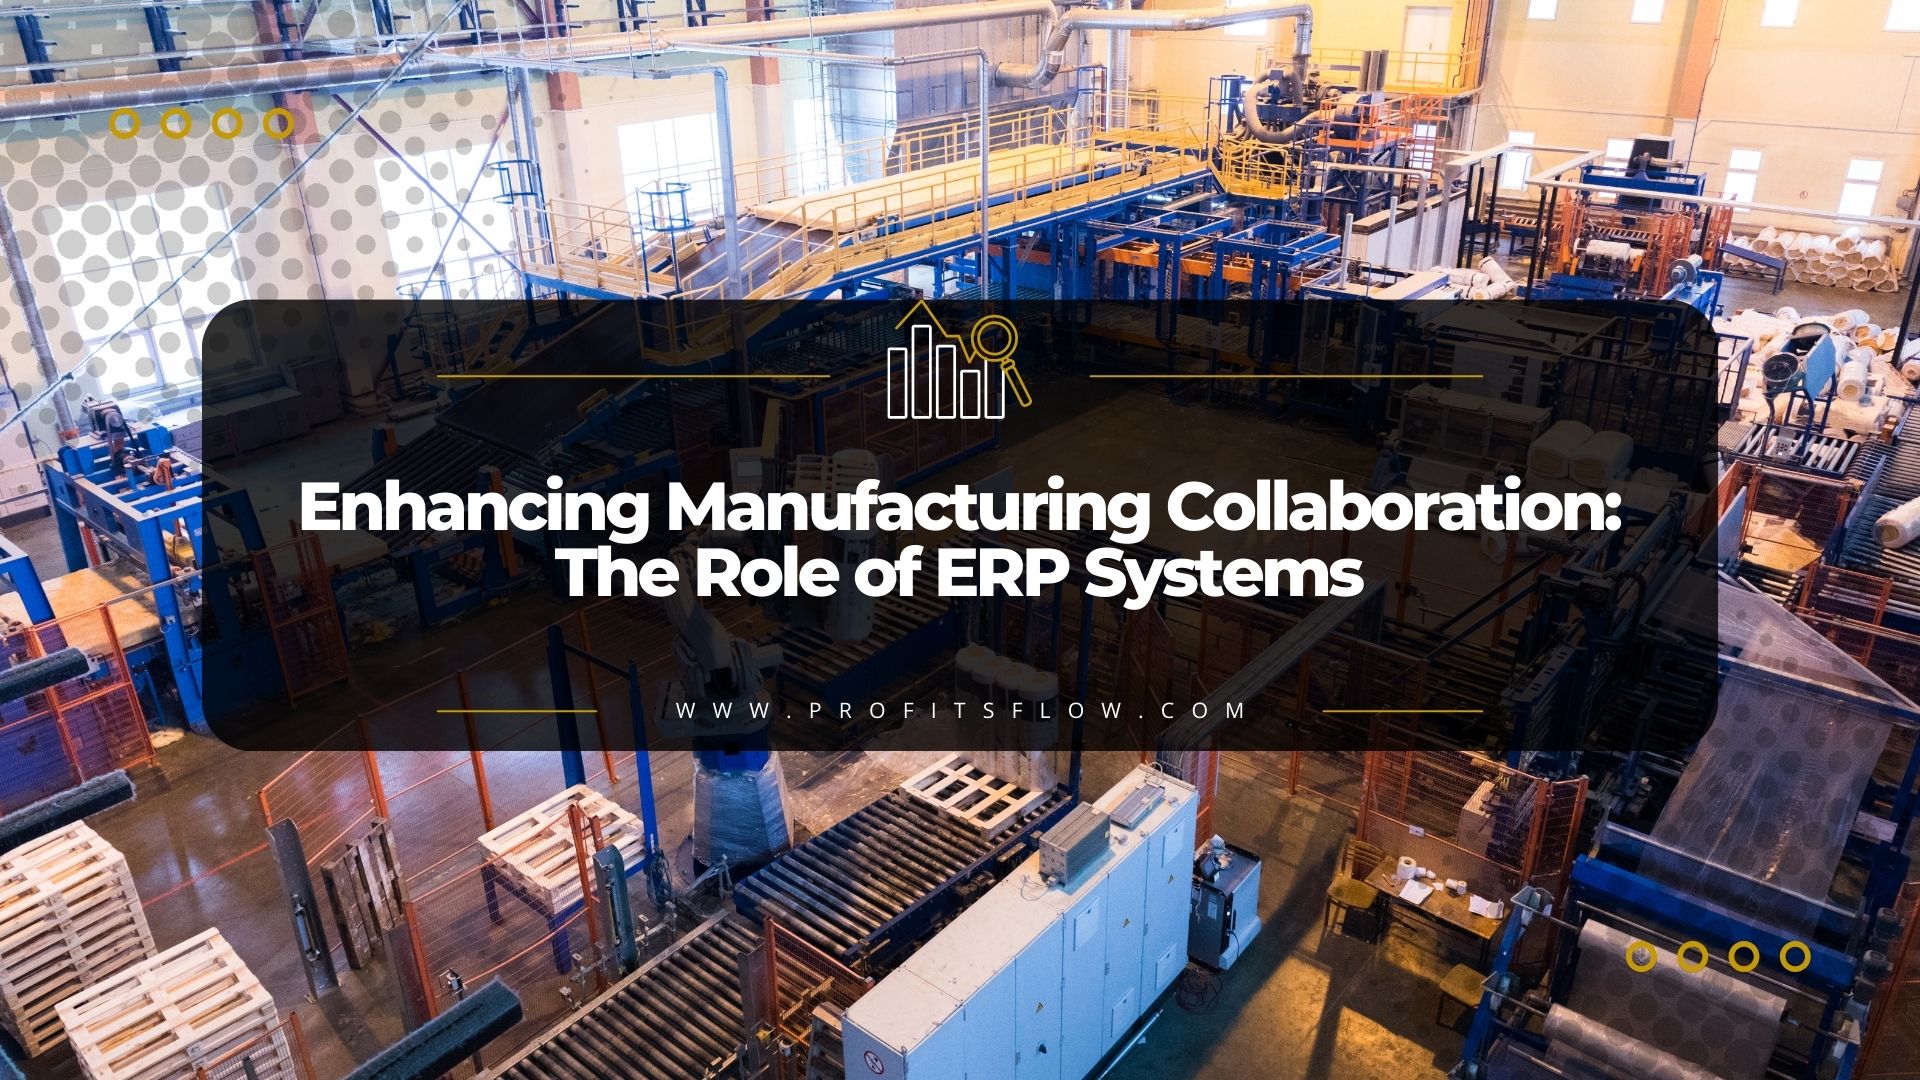 Enhancing Manufacturing Collaboration: The Role of ERP Systems